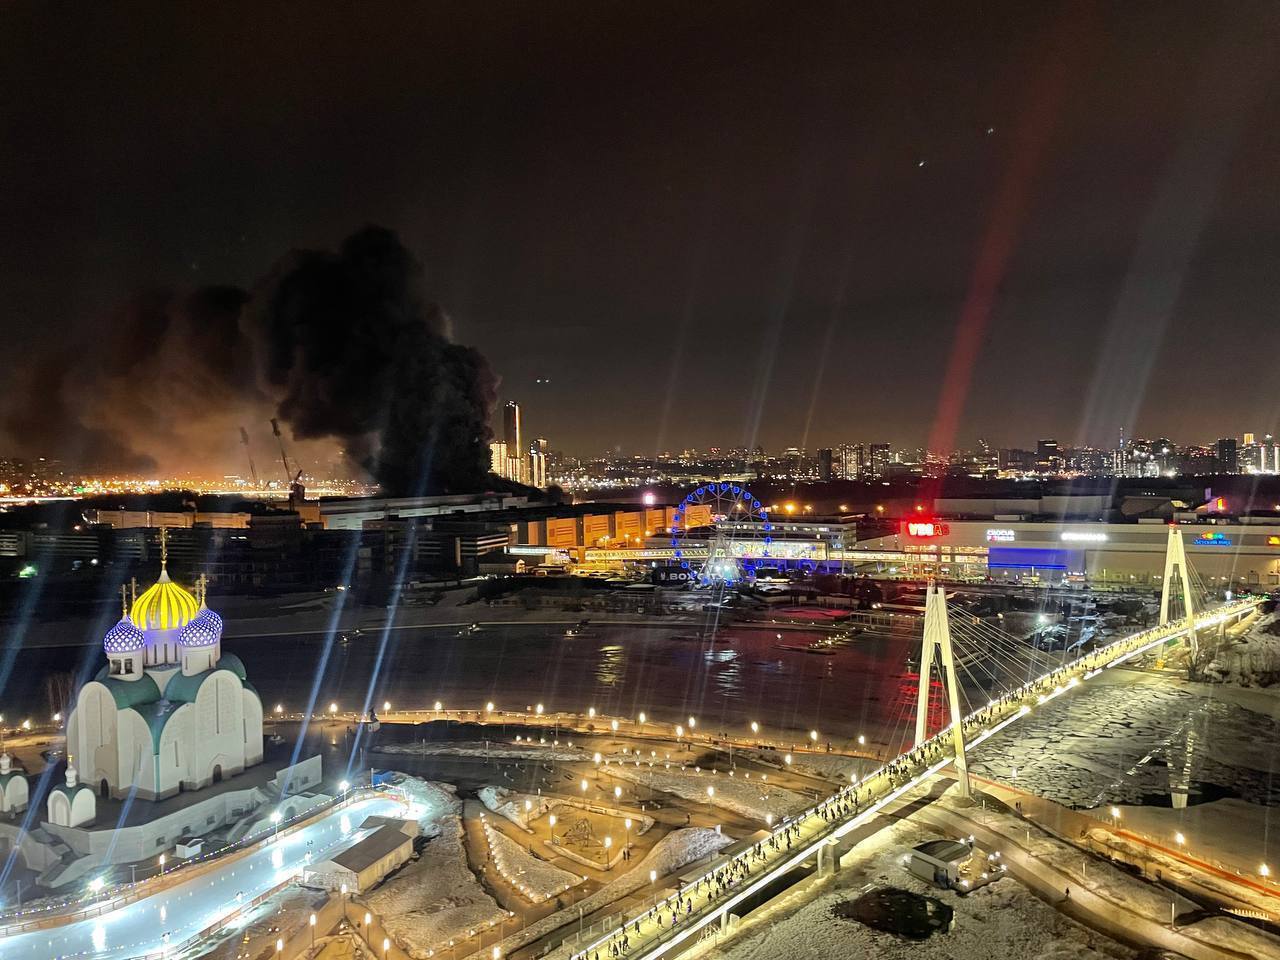 Unidentified gunmen shoot at visitors to Crocus City Hall in Moscow region and set the building on fire (photos and video)